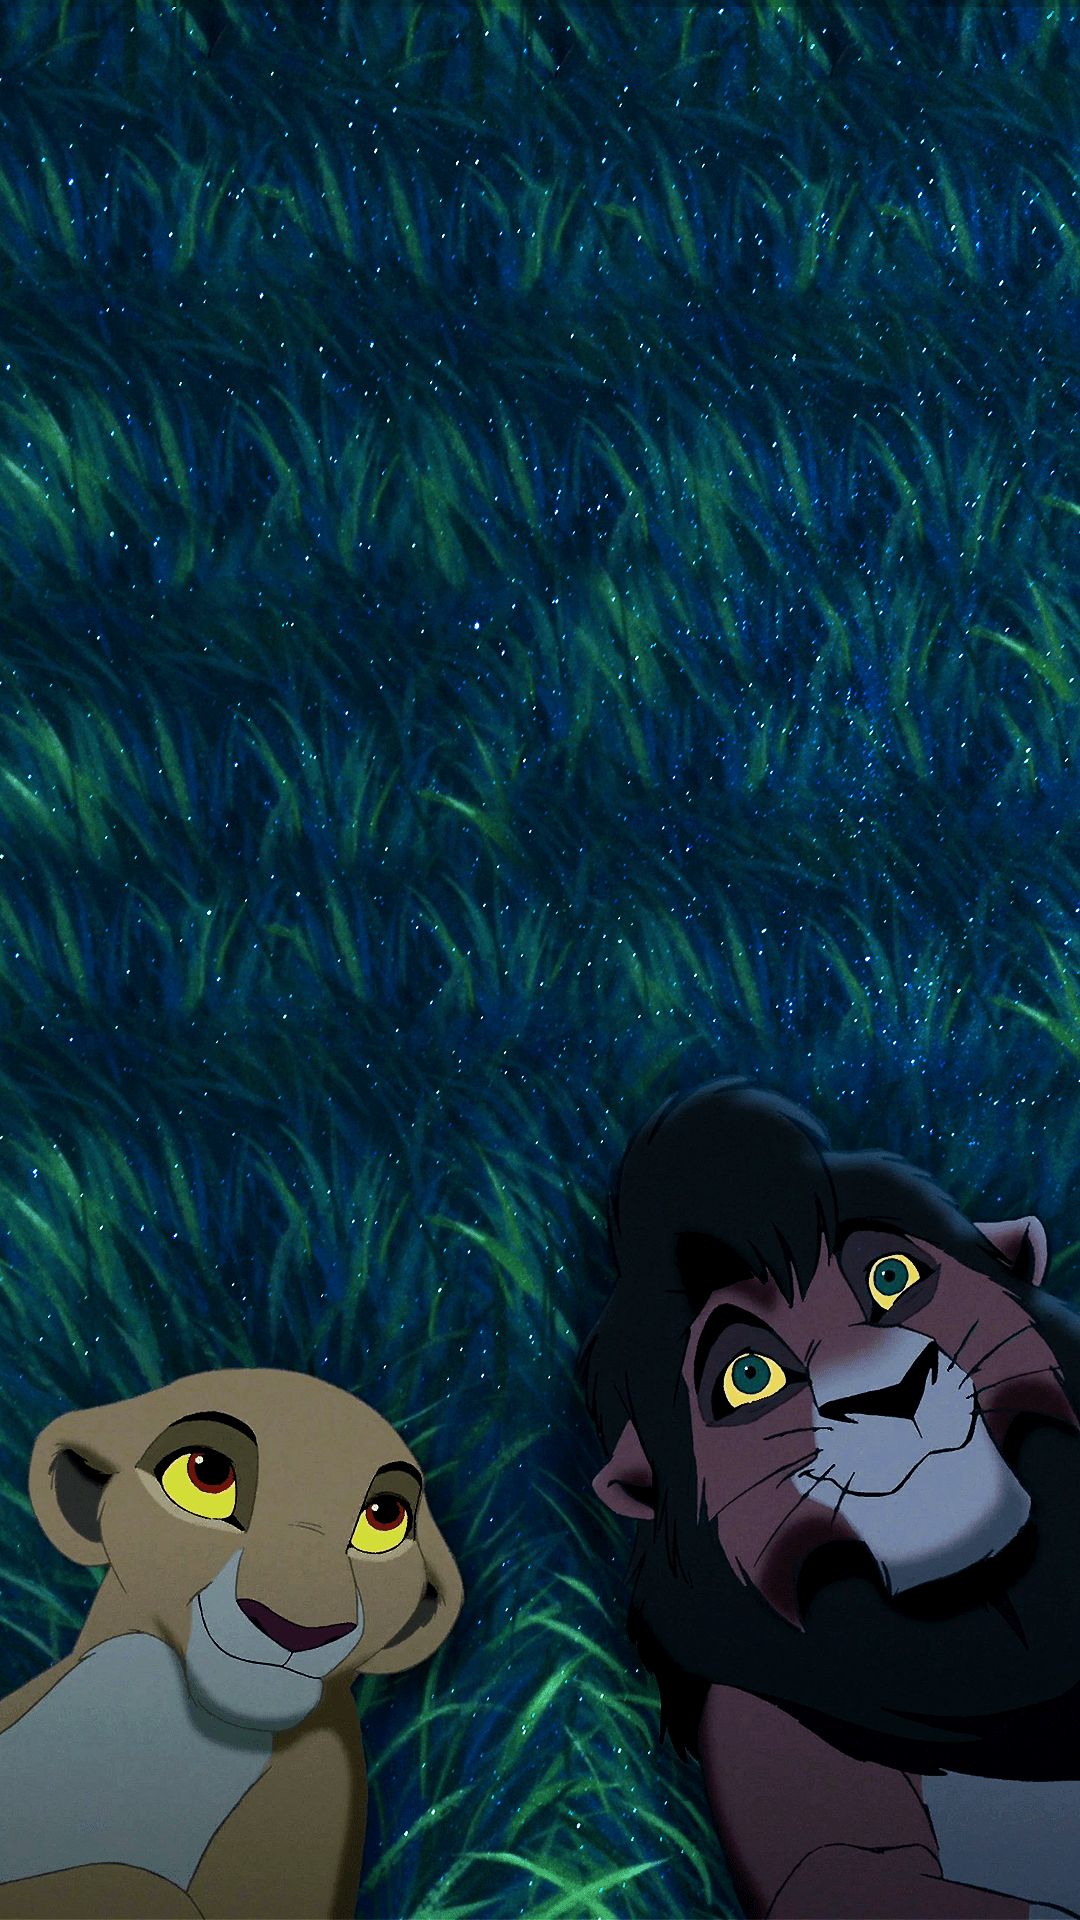 Lion King 2 background can find the rest on my website - Lion king picture, Lion king fan art, Lion king art